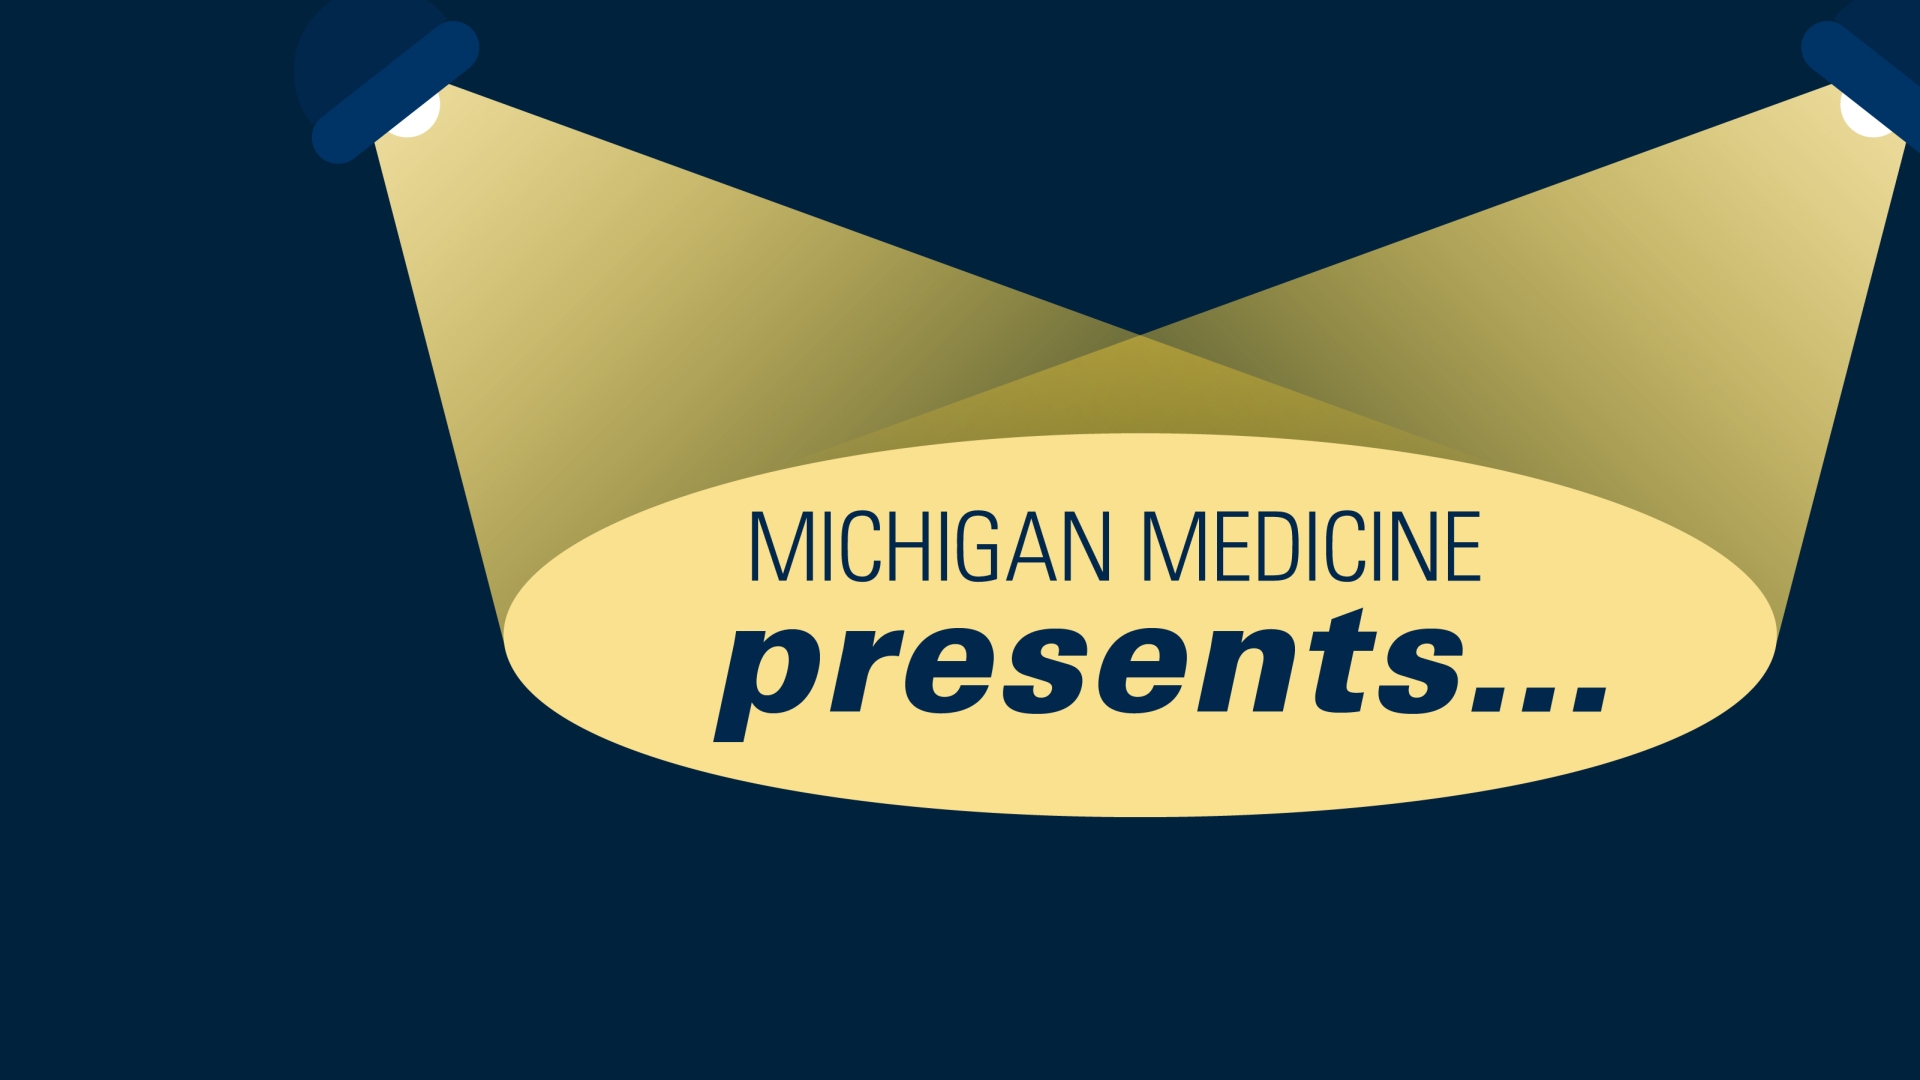 Michigan Medicine Presents... on dark blue background with two lights shining on the words